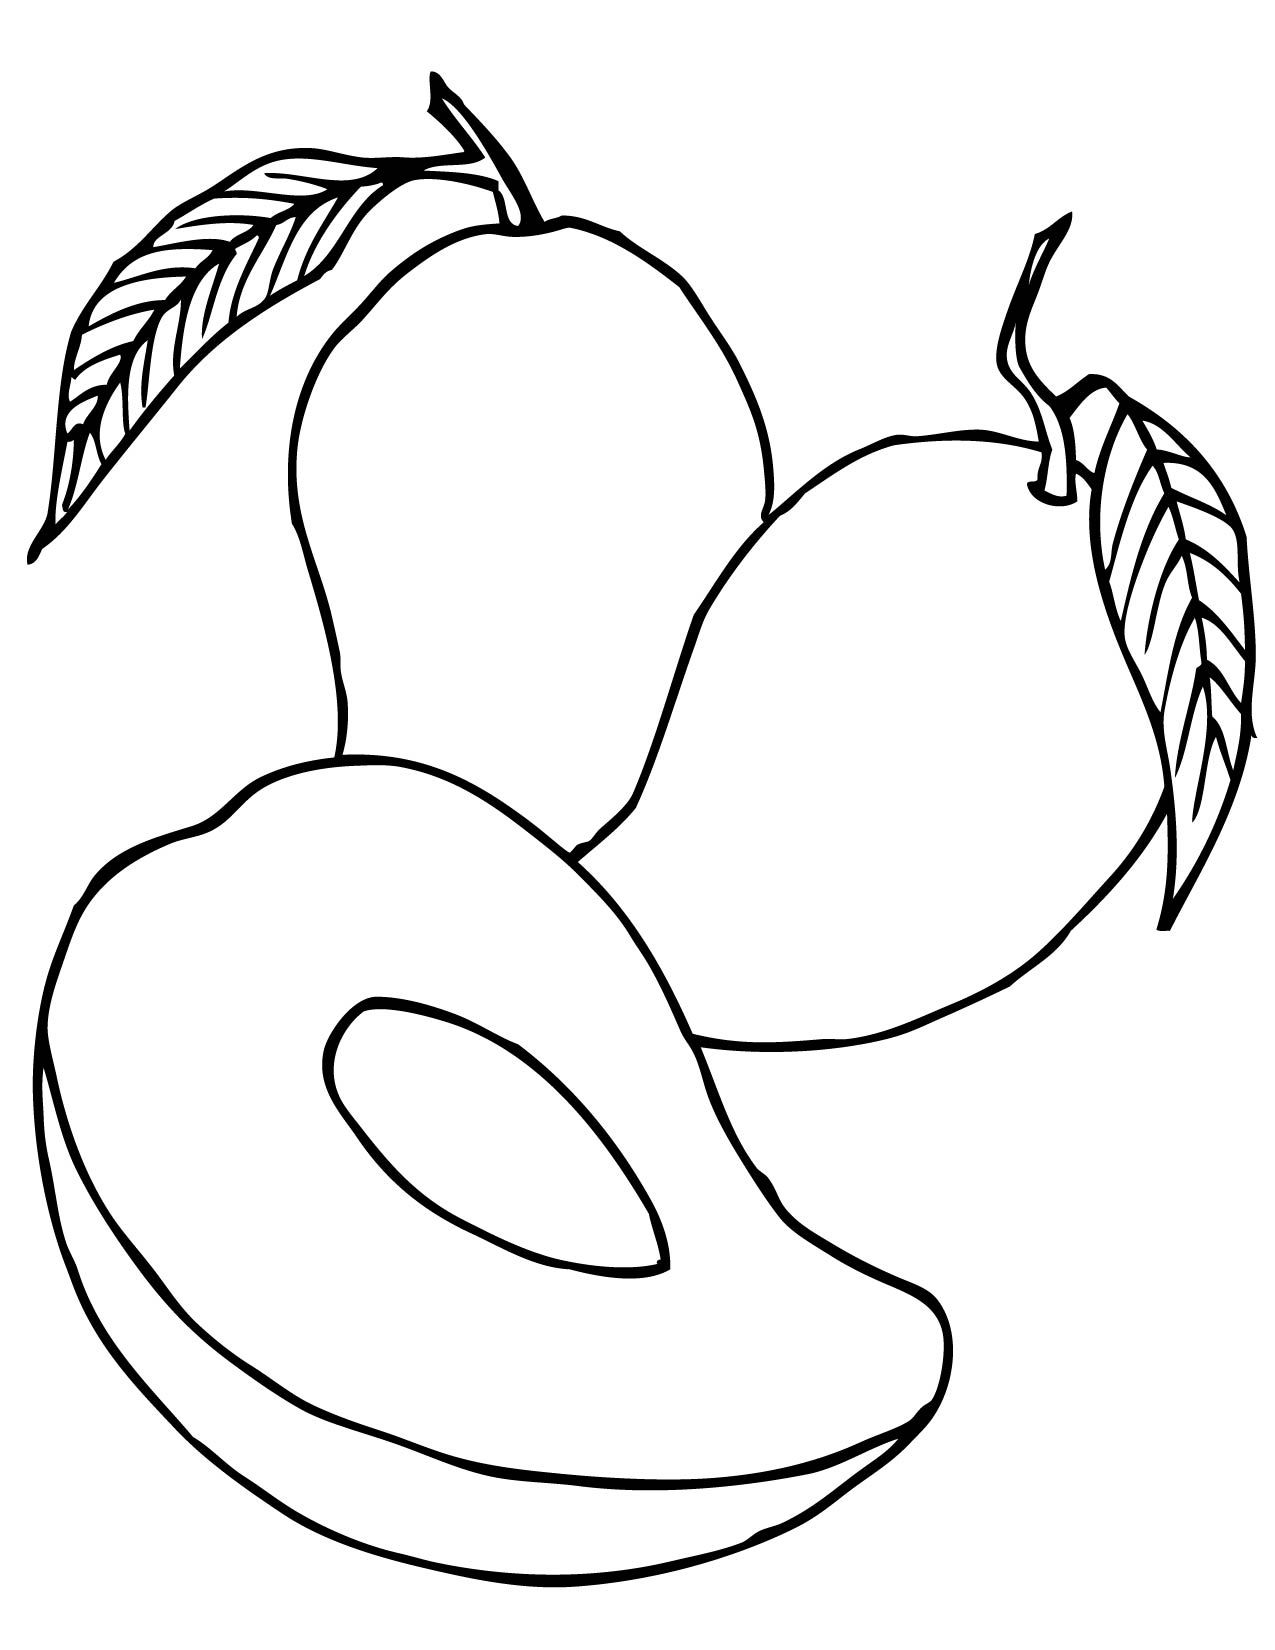 Free Mango Coloring Pages, Download Free Mango Coloring Pages png ...